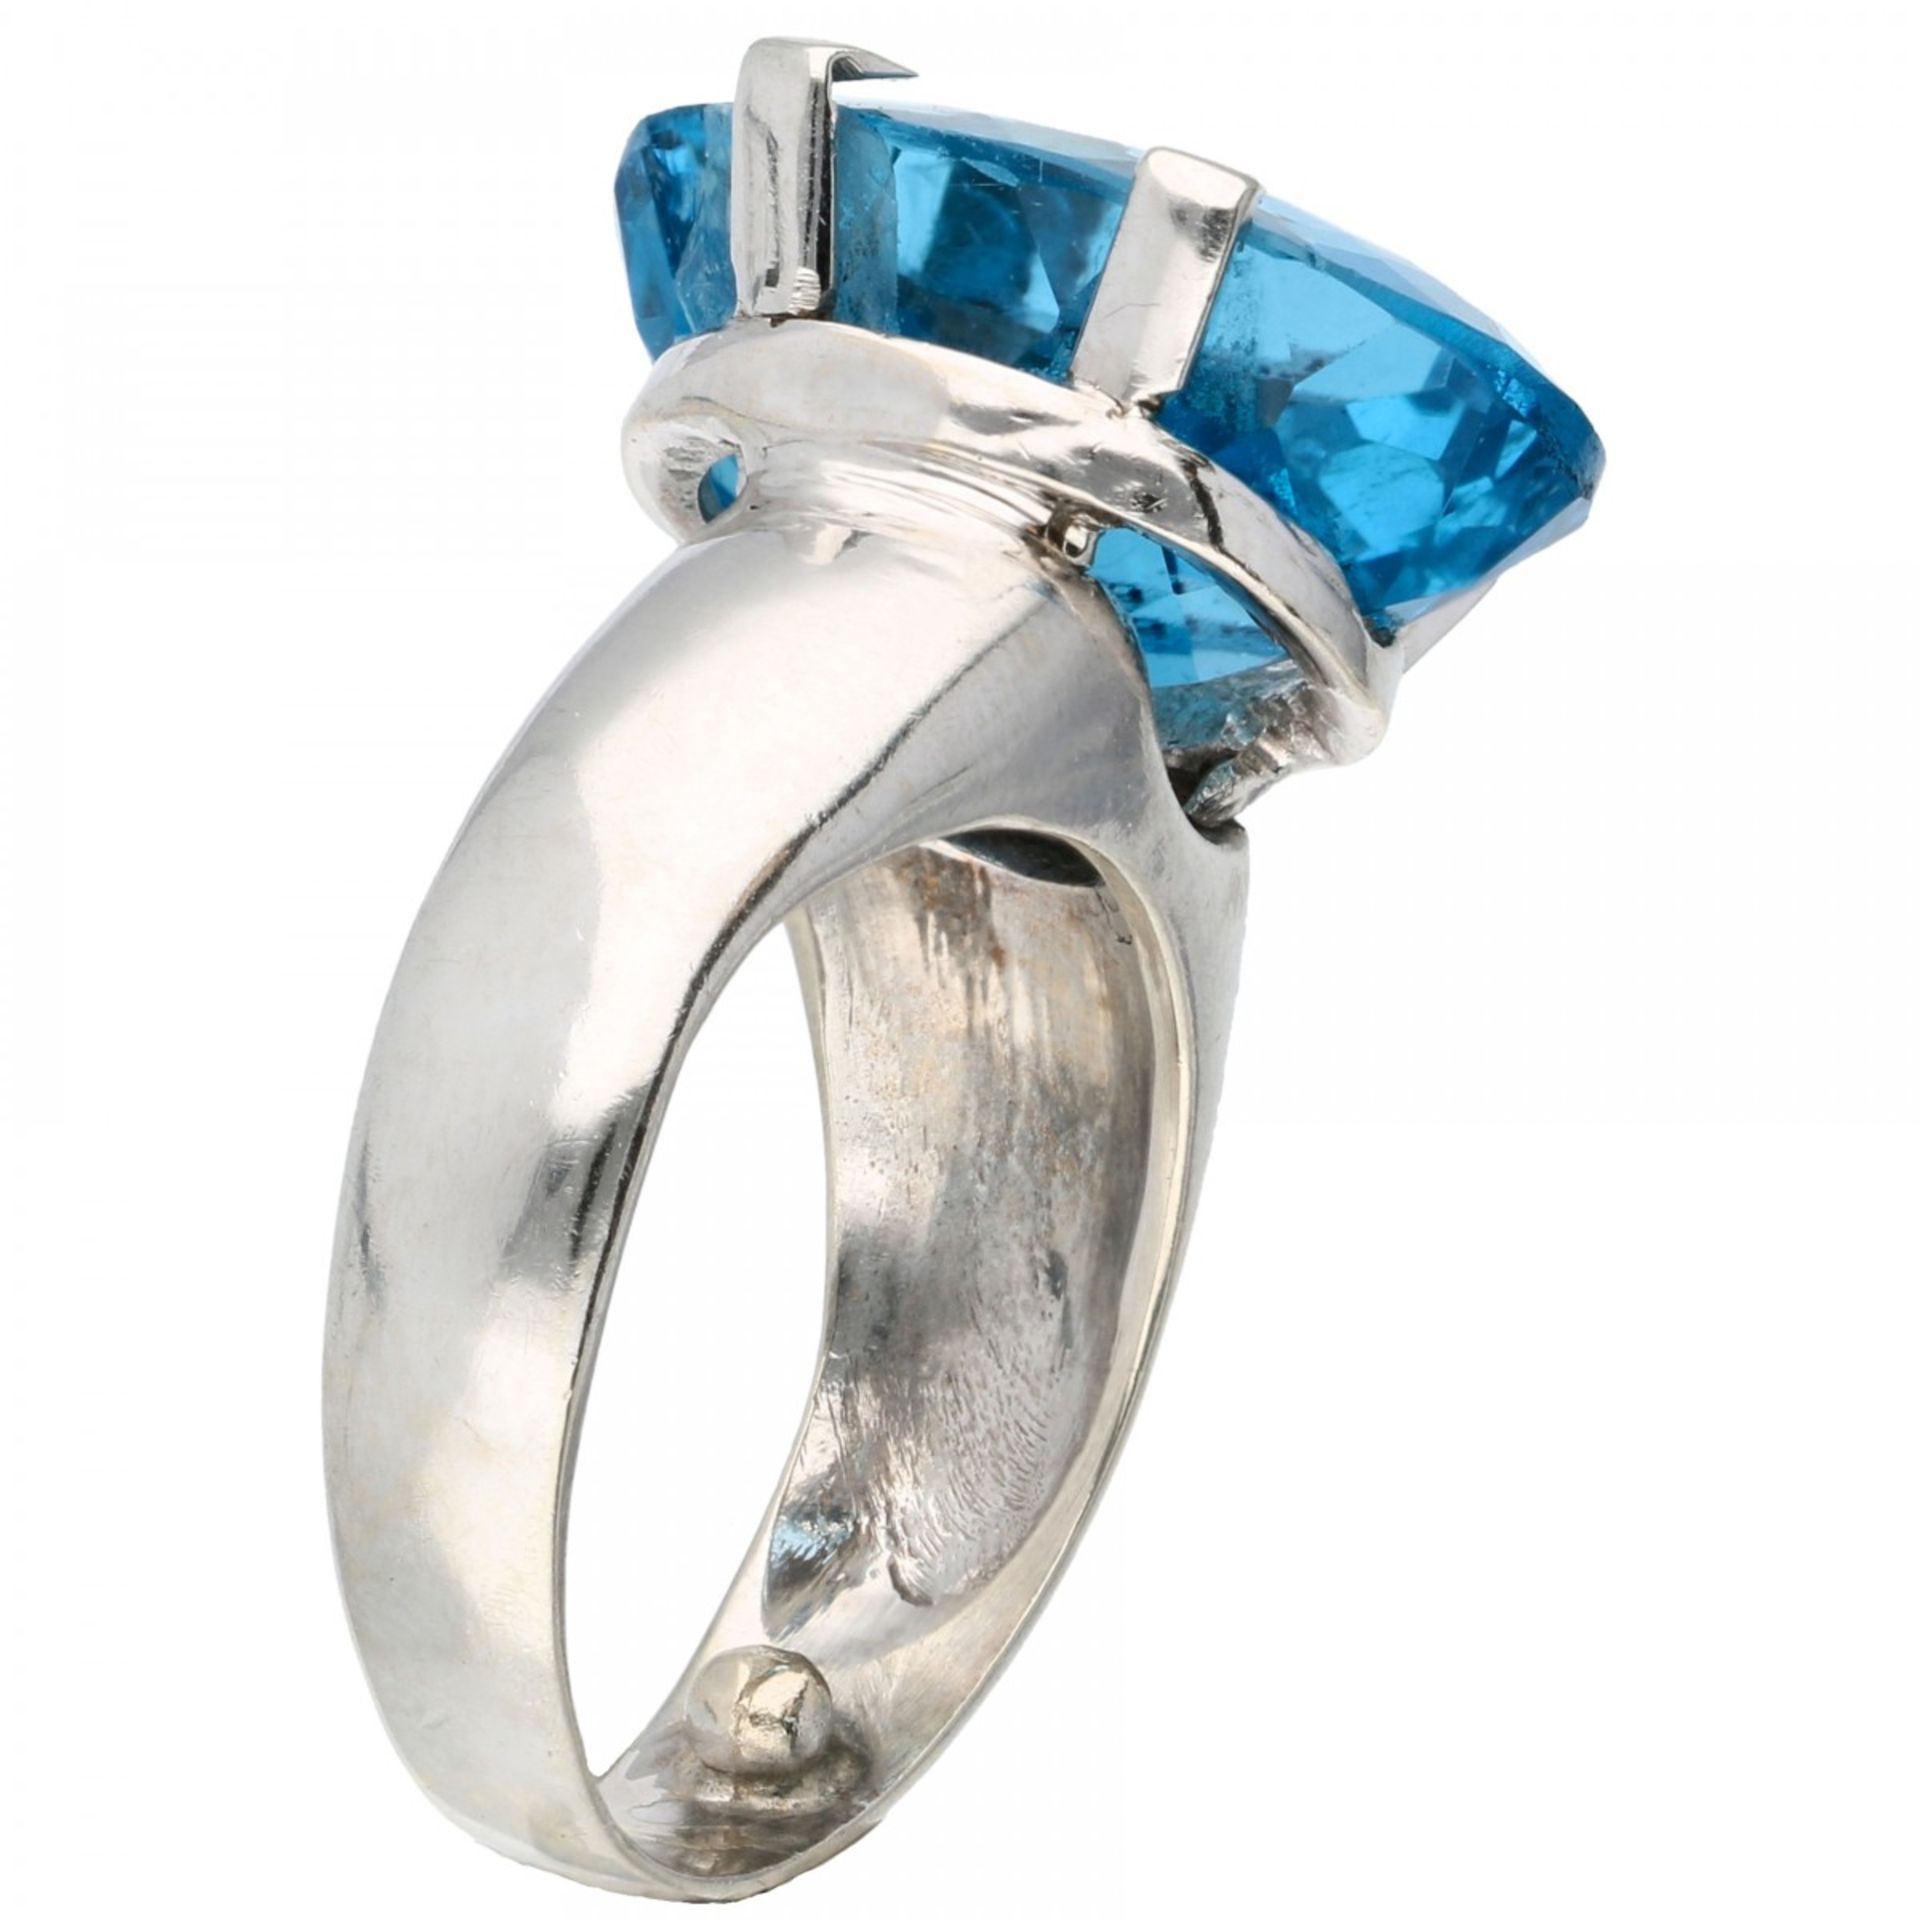 White gold solitaire ring set with approx. 10.71 ct. blue topaz - 18 ct. - Image 2 of 3